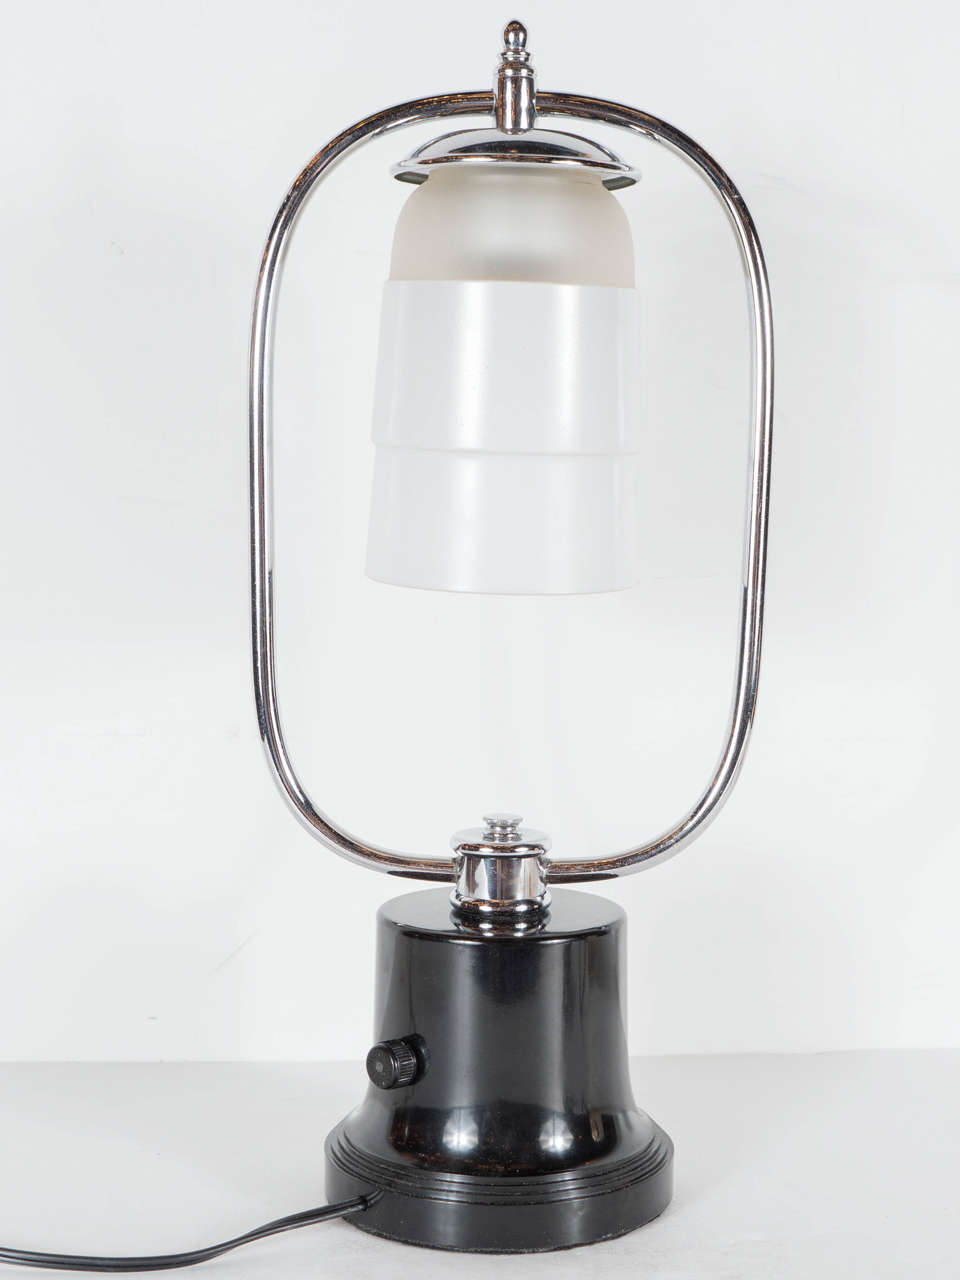 This exceptional Art Deco Machine Age table lamp is superb. Created in the manner of Walter Von Nessen it features a bakelite base with a chrome arm form design suspending a stepped skyscraper form globe in milk and frosted glass. This lamp would be